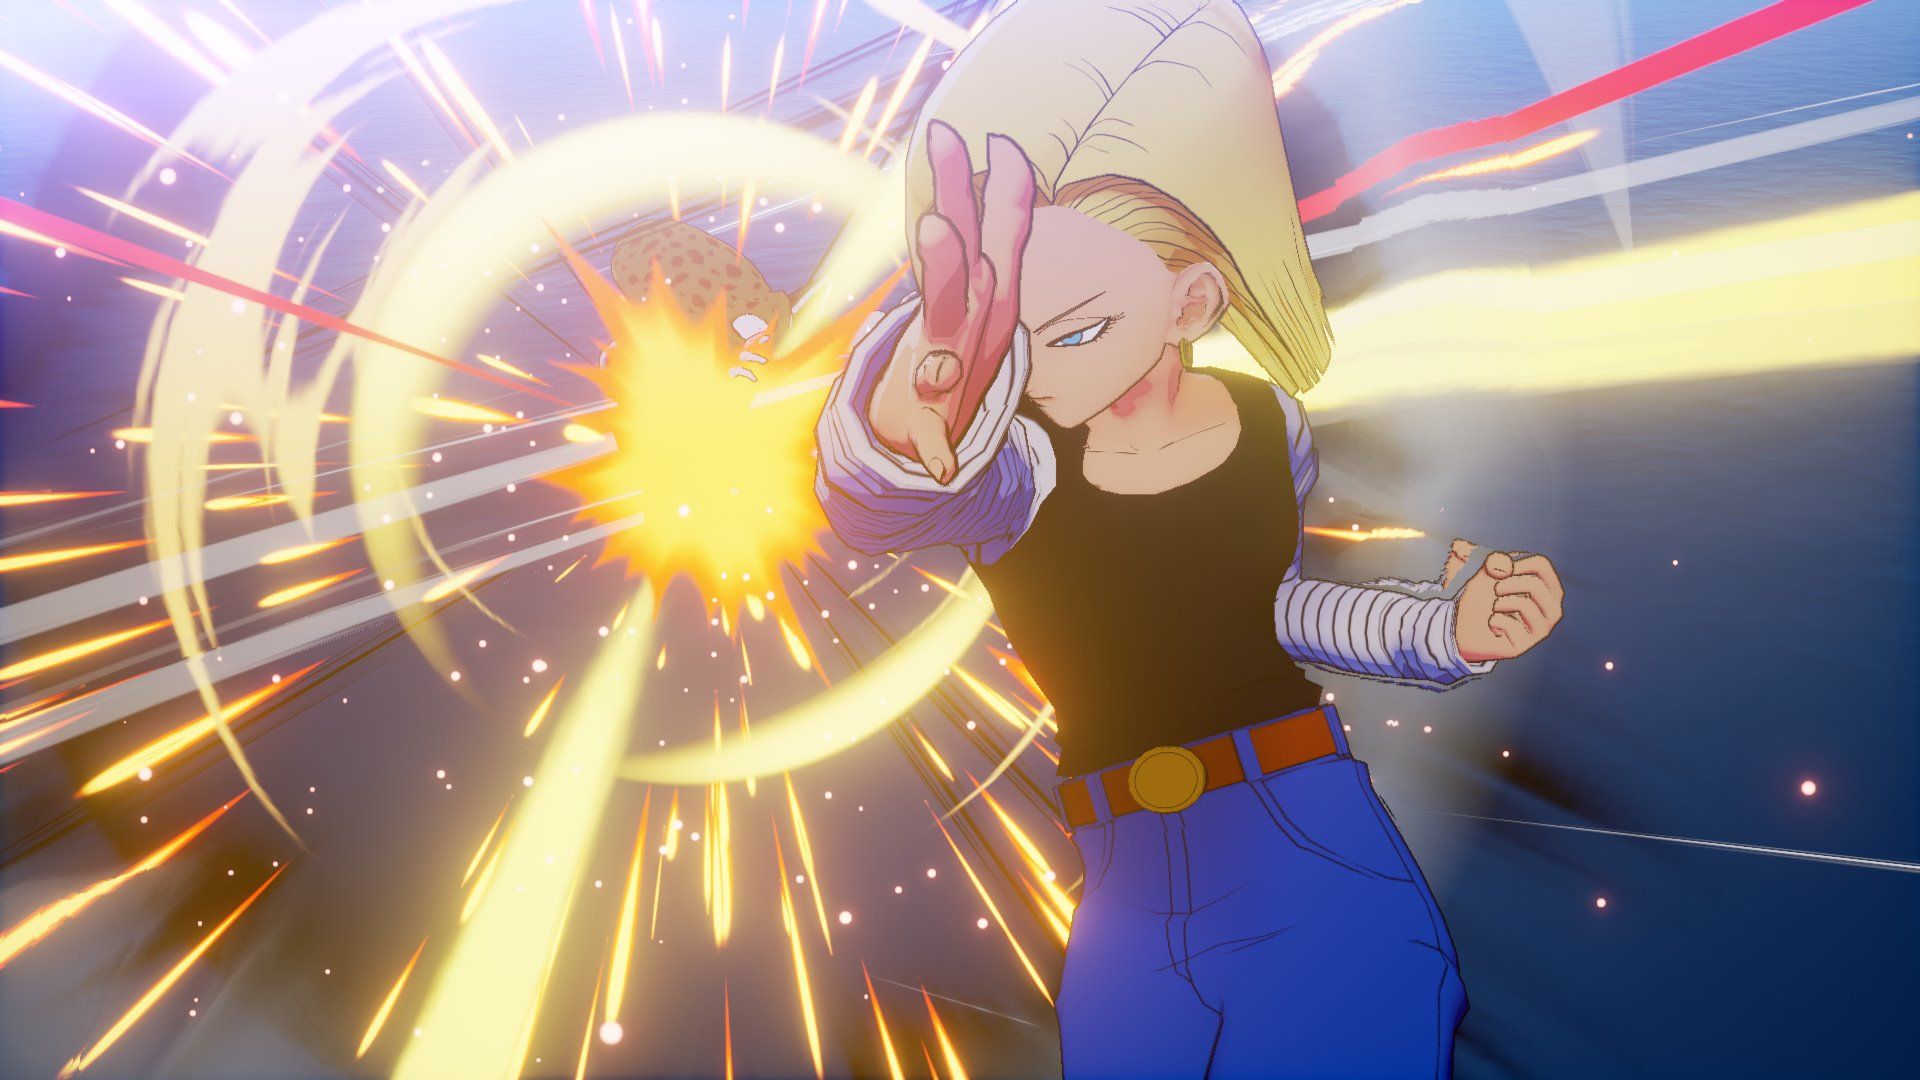 New Screenshots for Dragon Ball Z: Kakarot Show Off Android 18